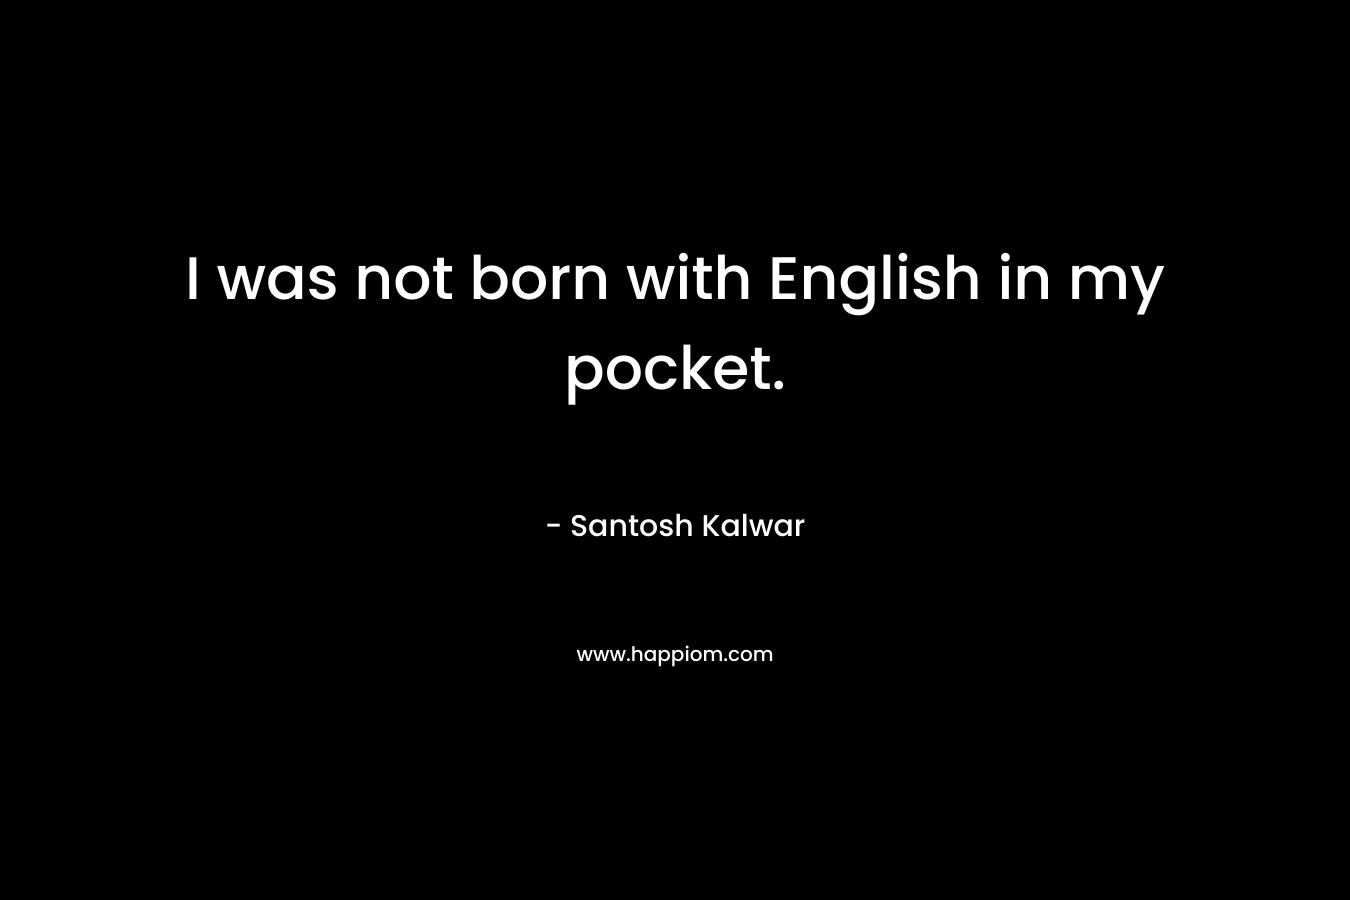 I was not born with English in my pocket.